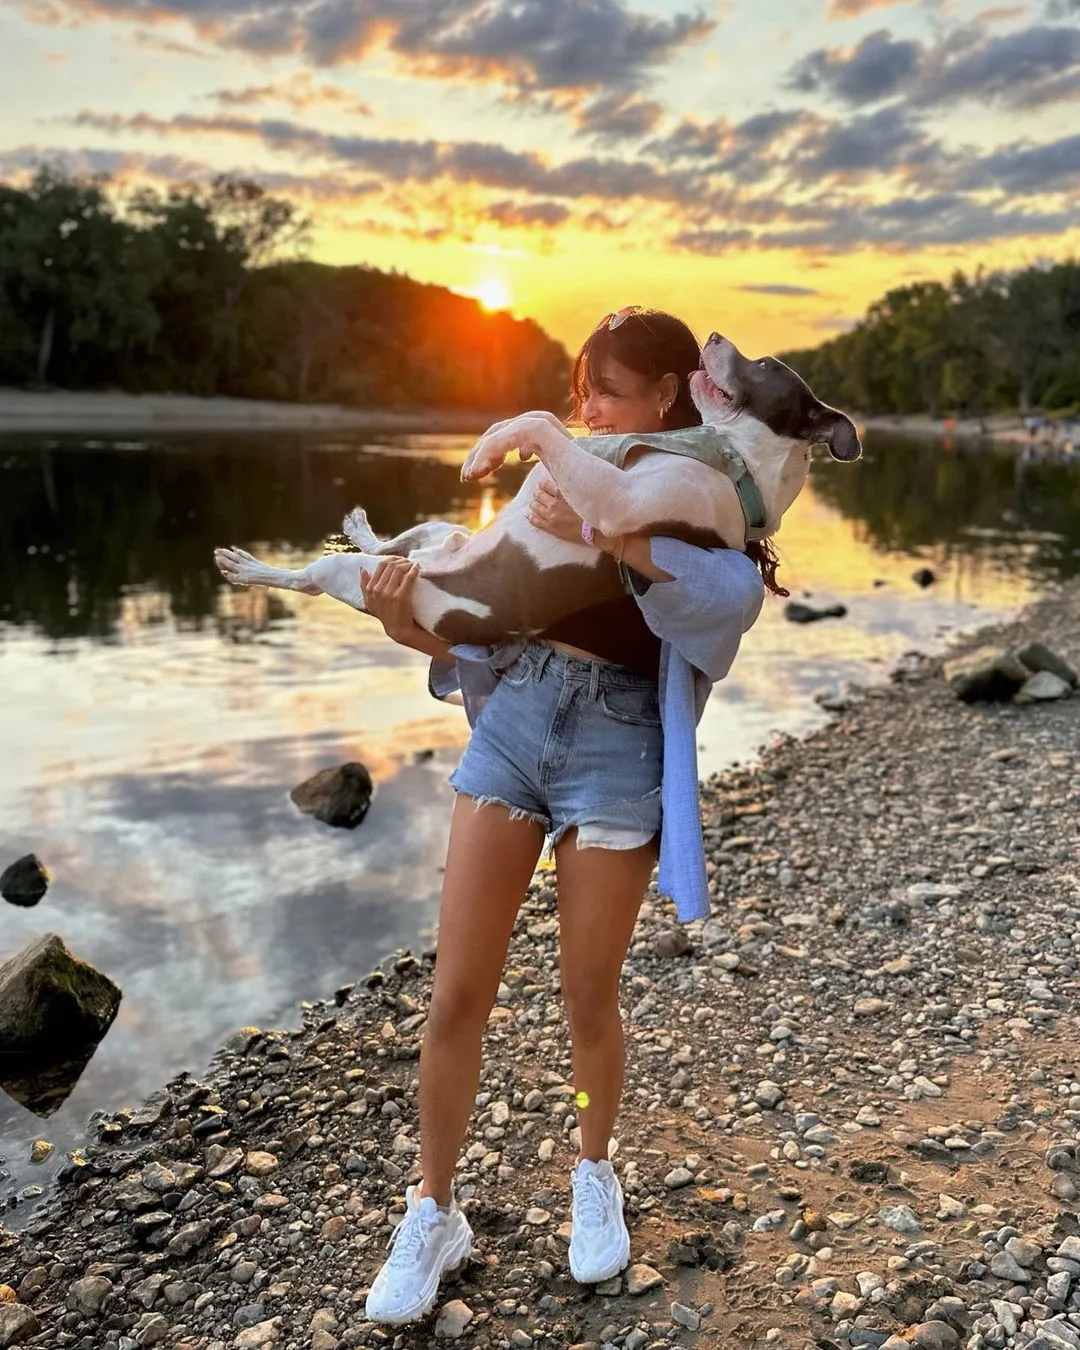 woman holding the dog at sunset